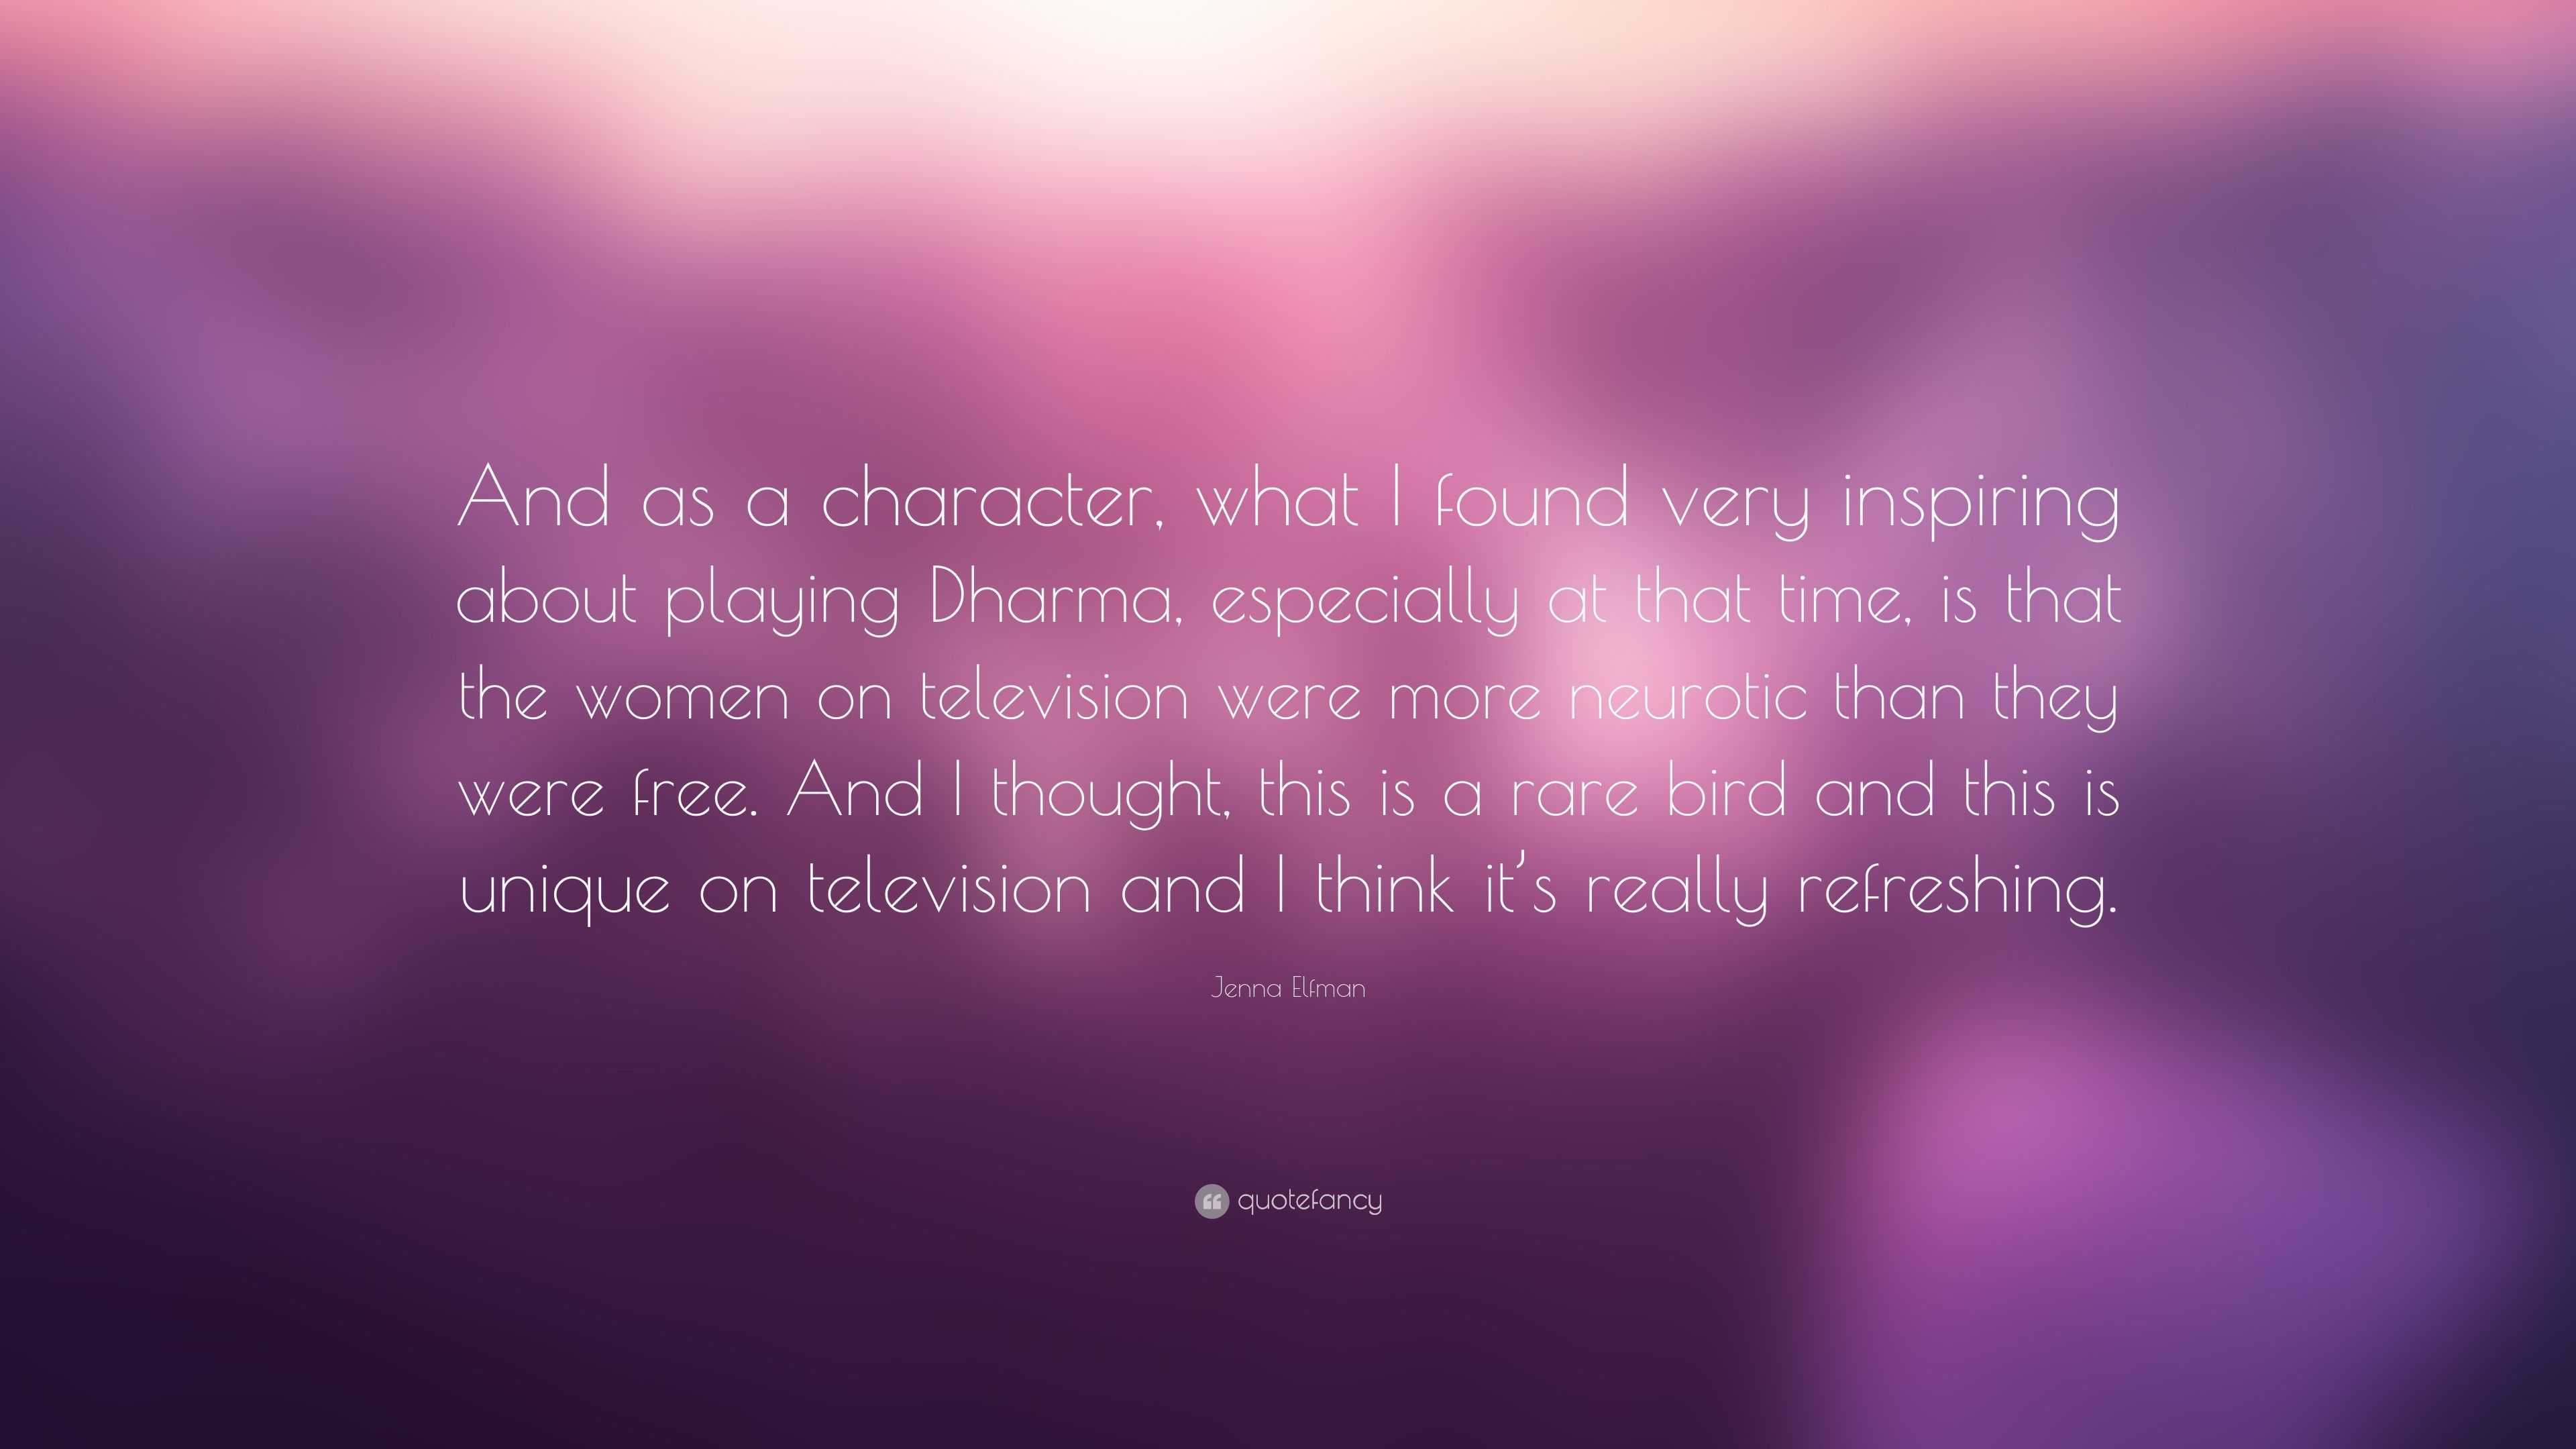 Jenna Elfman Quote: “And as a character, what I found very inspiring ...